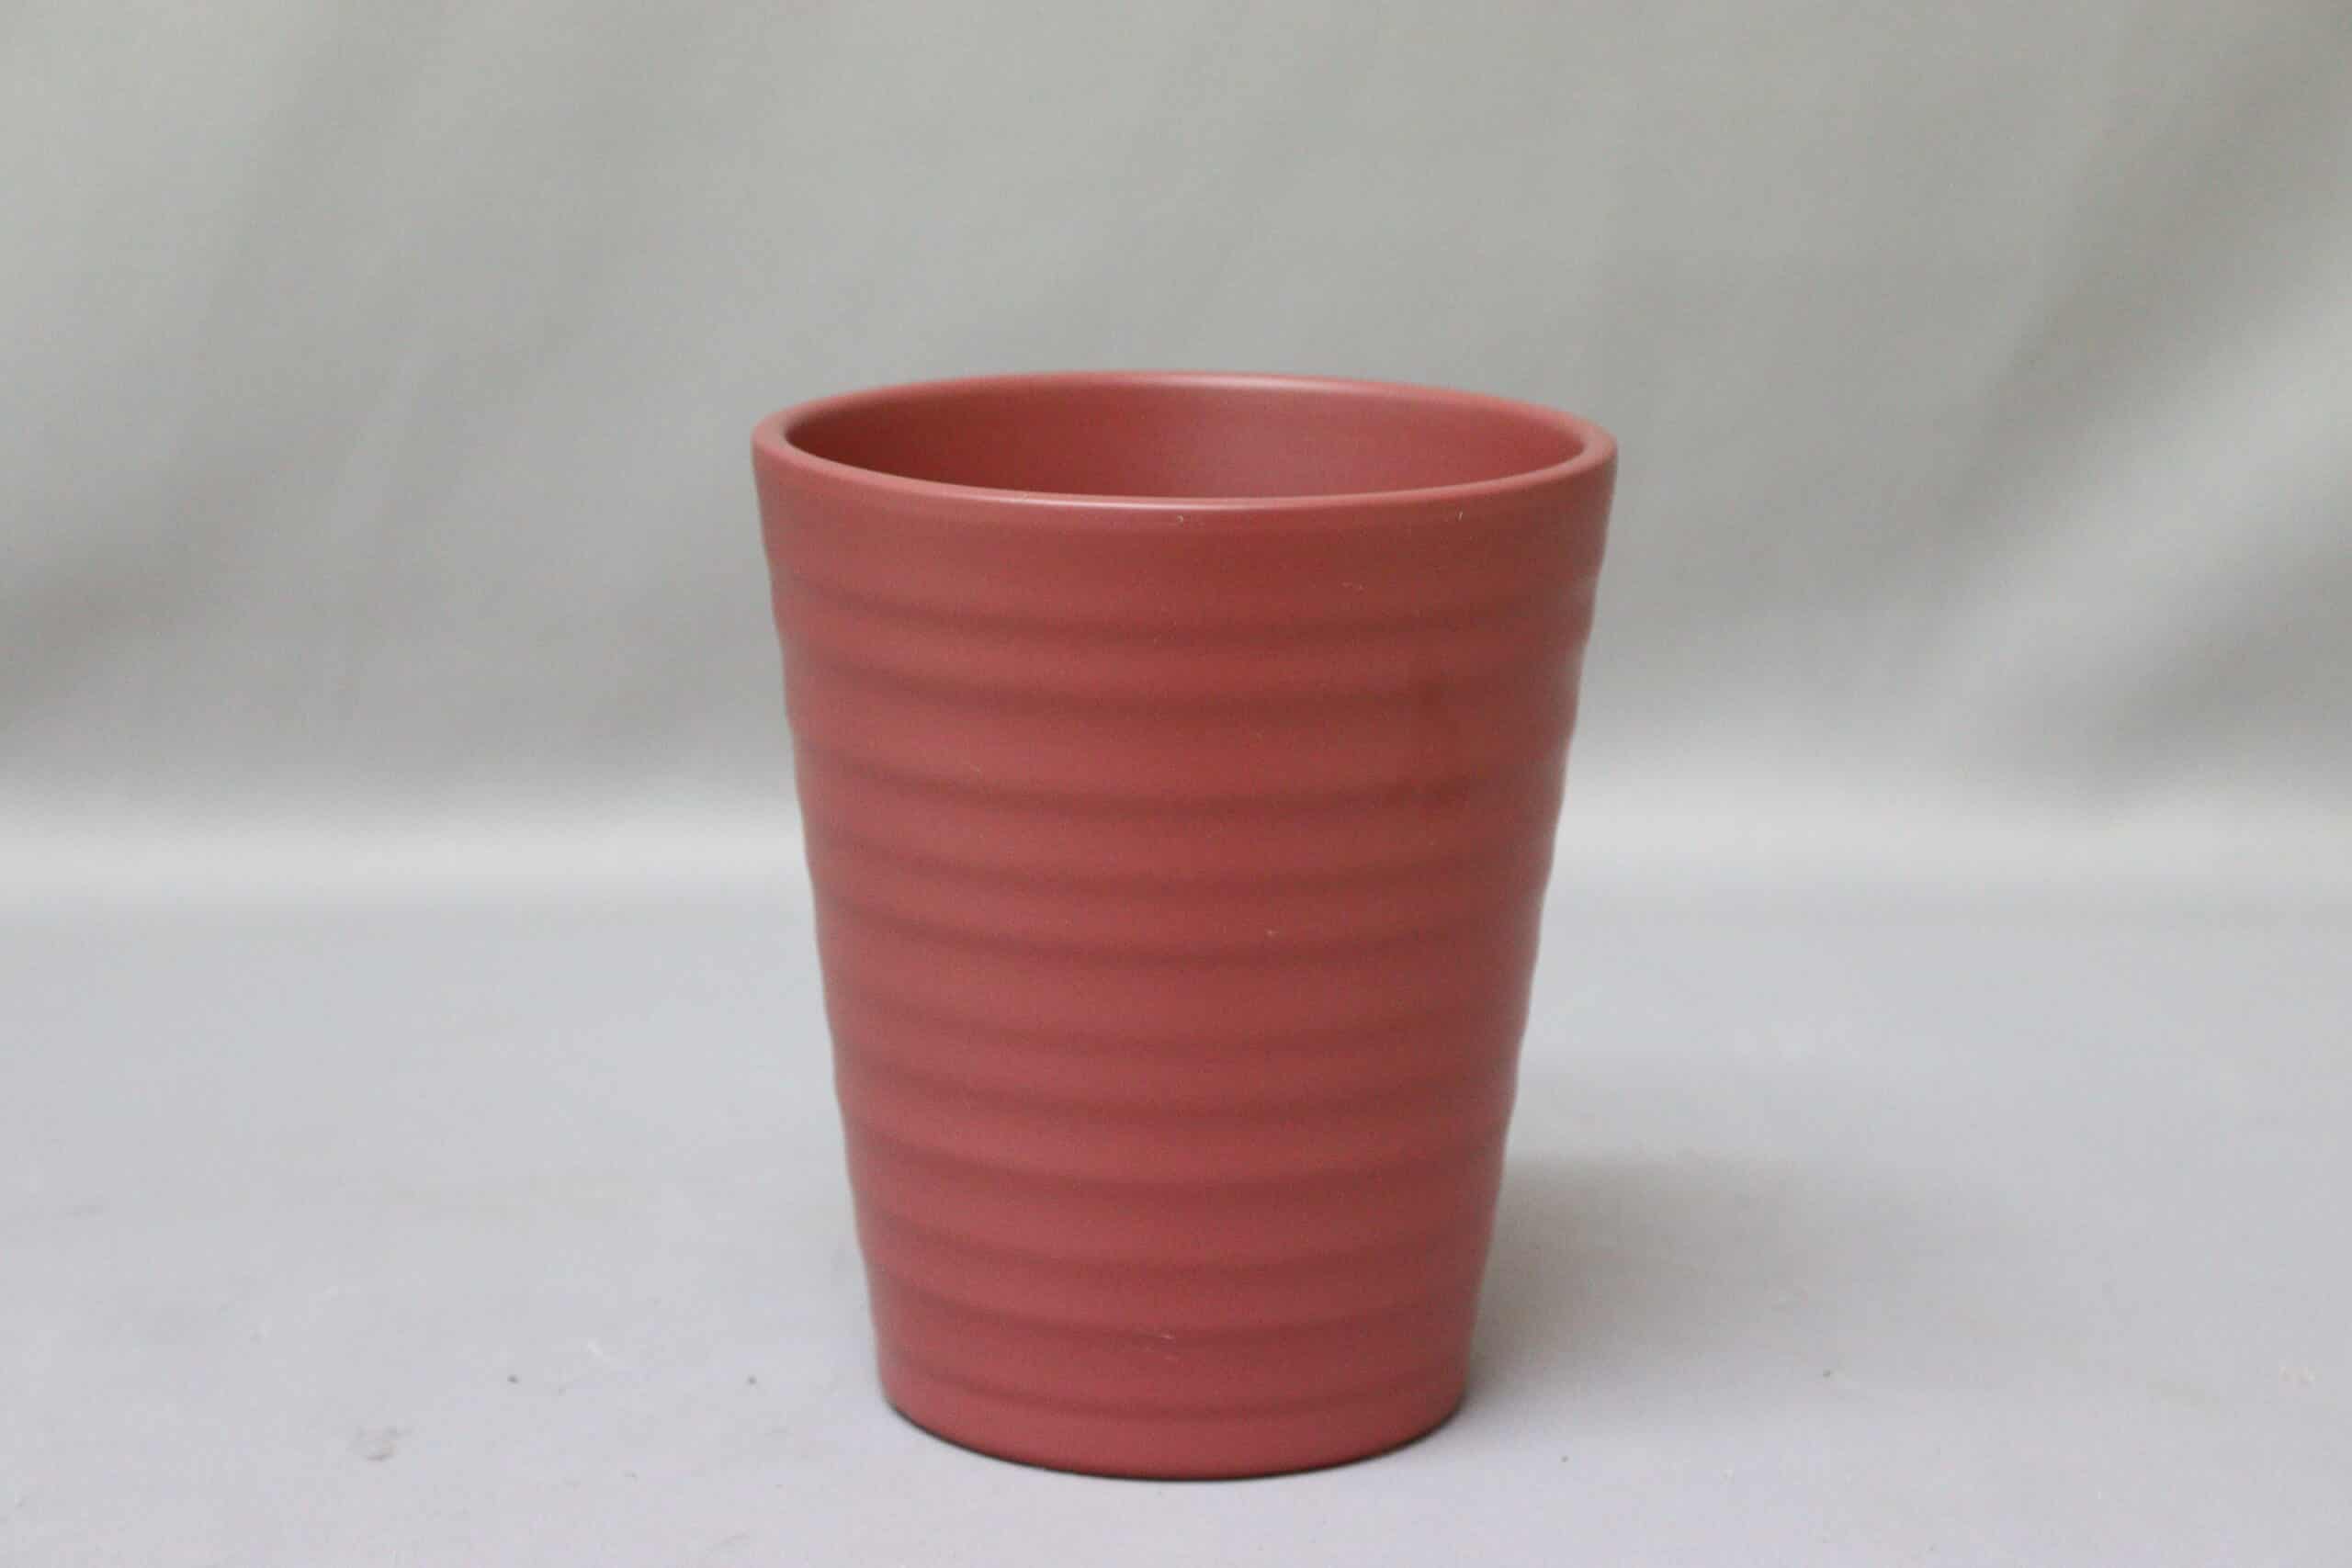 Tall pink maroon pot cover with line detail for potted plants.